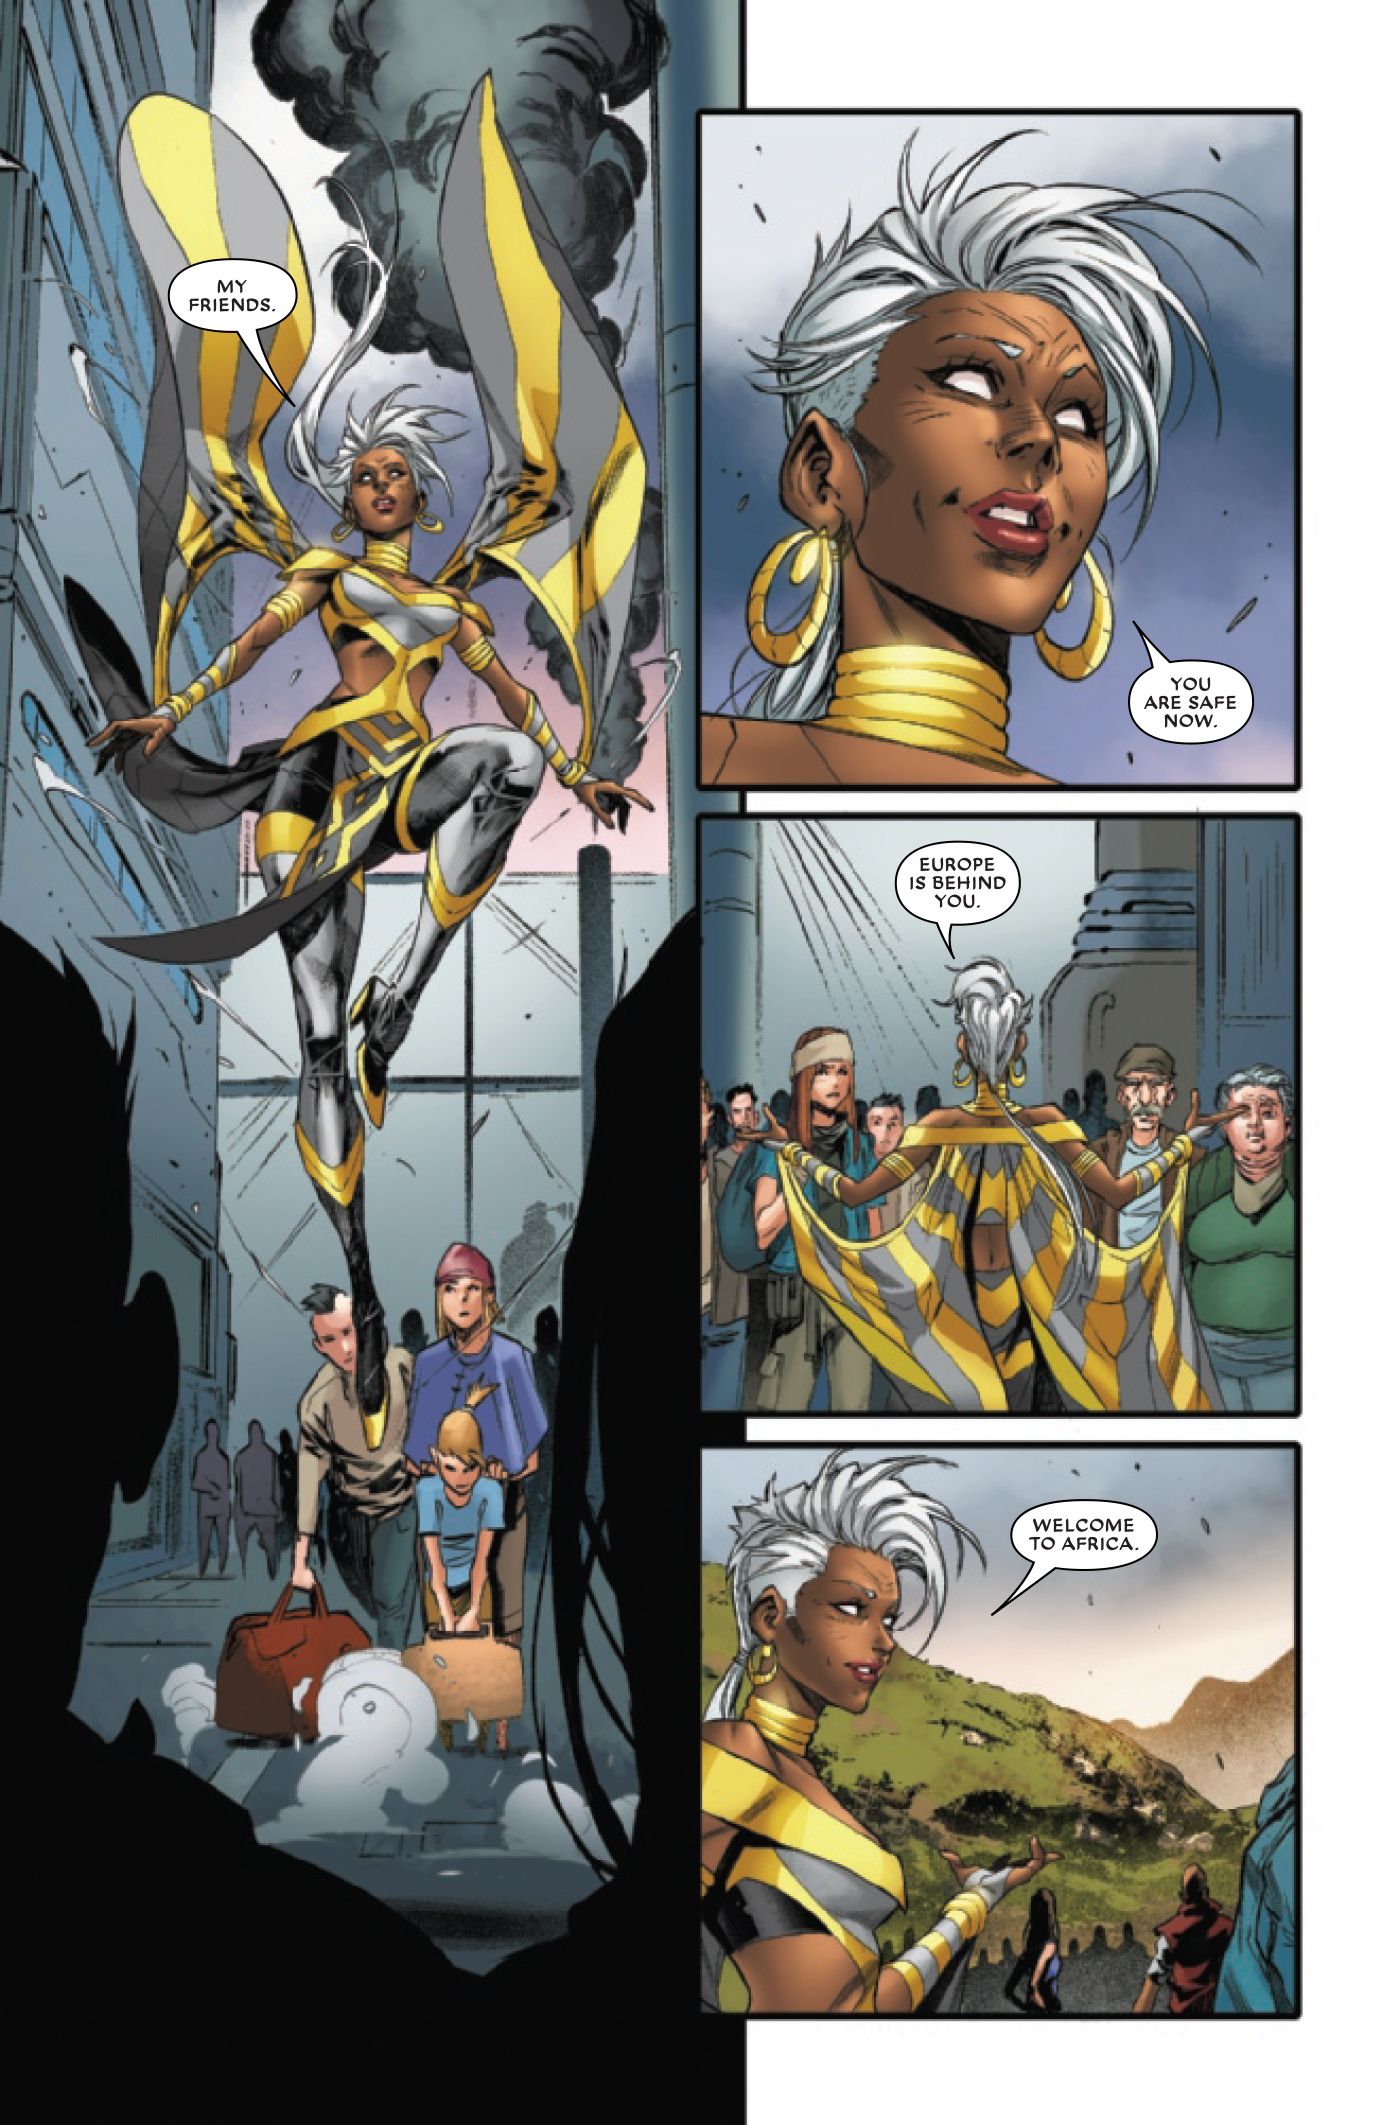 Storm welcomes the refugees to Africa.